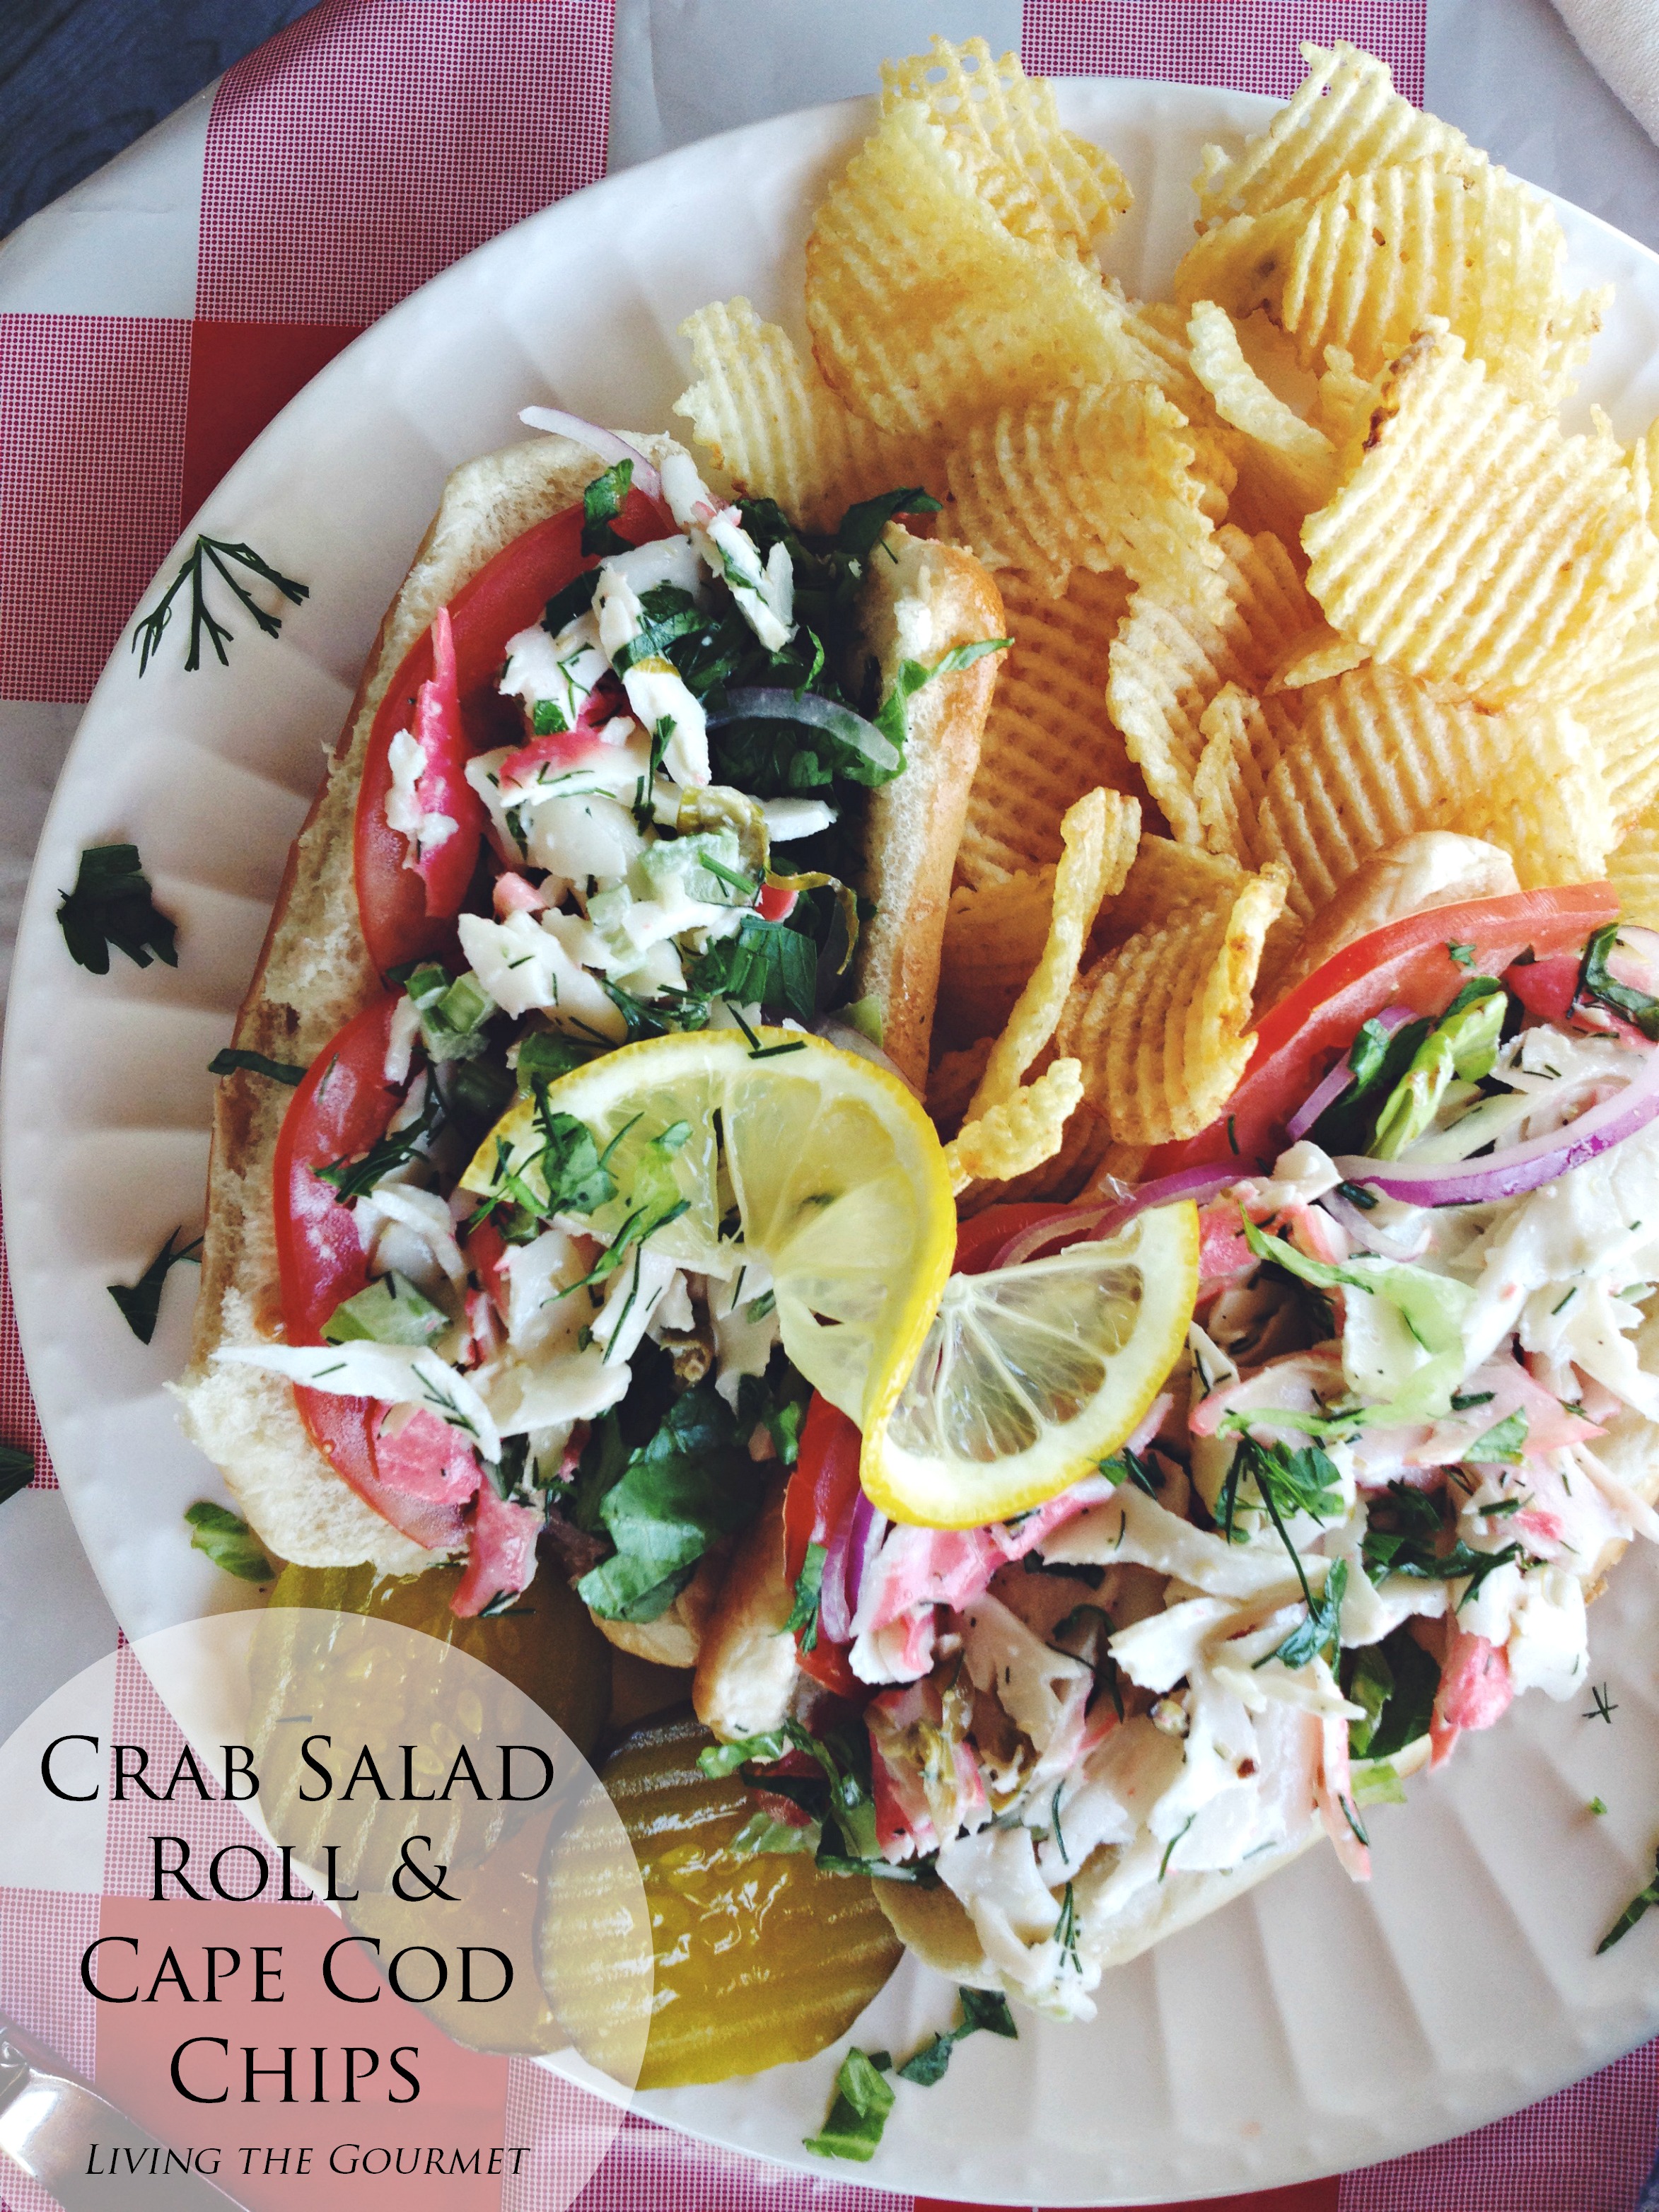  #AD #ChipLove | Living the Gourmet: Crab Salad Roll & Cape Cod Chips